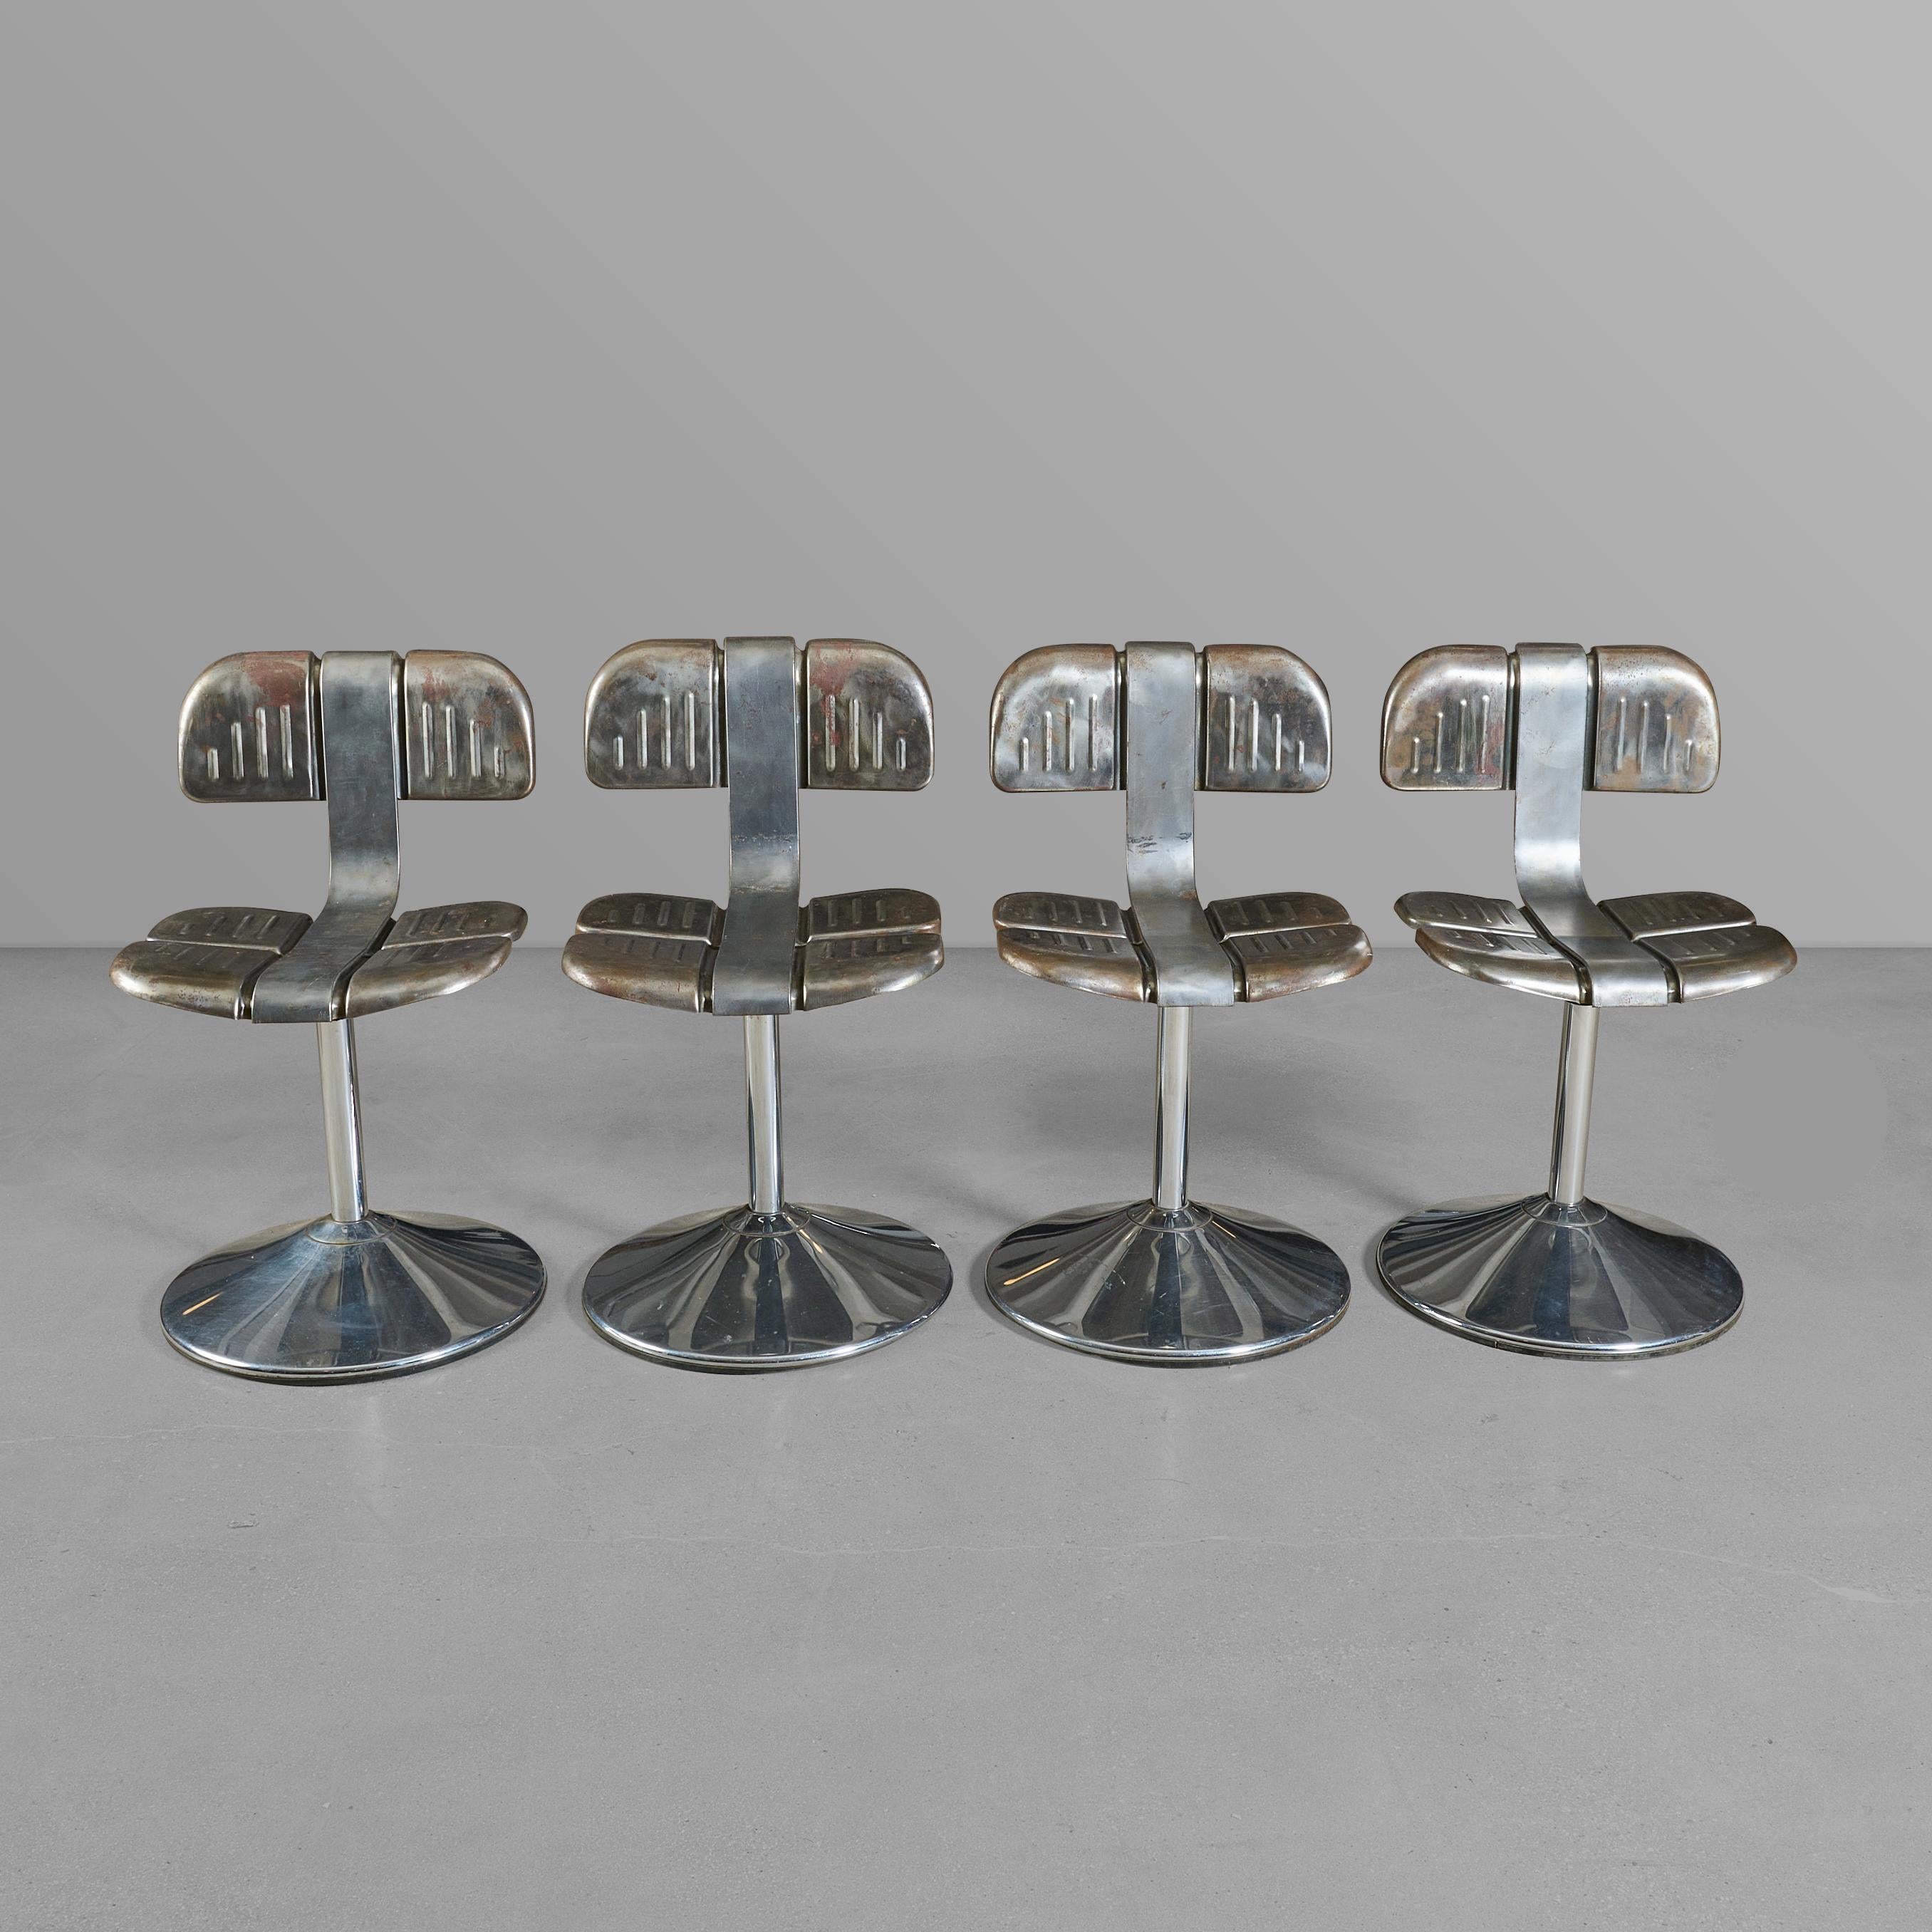 Set of four metal chairs with great design. Comfy, and they swivel as well.

